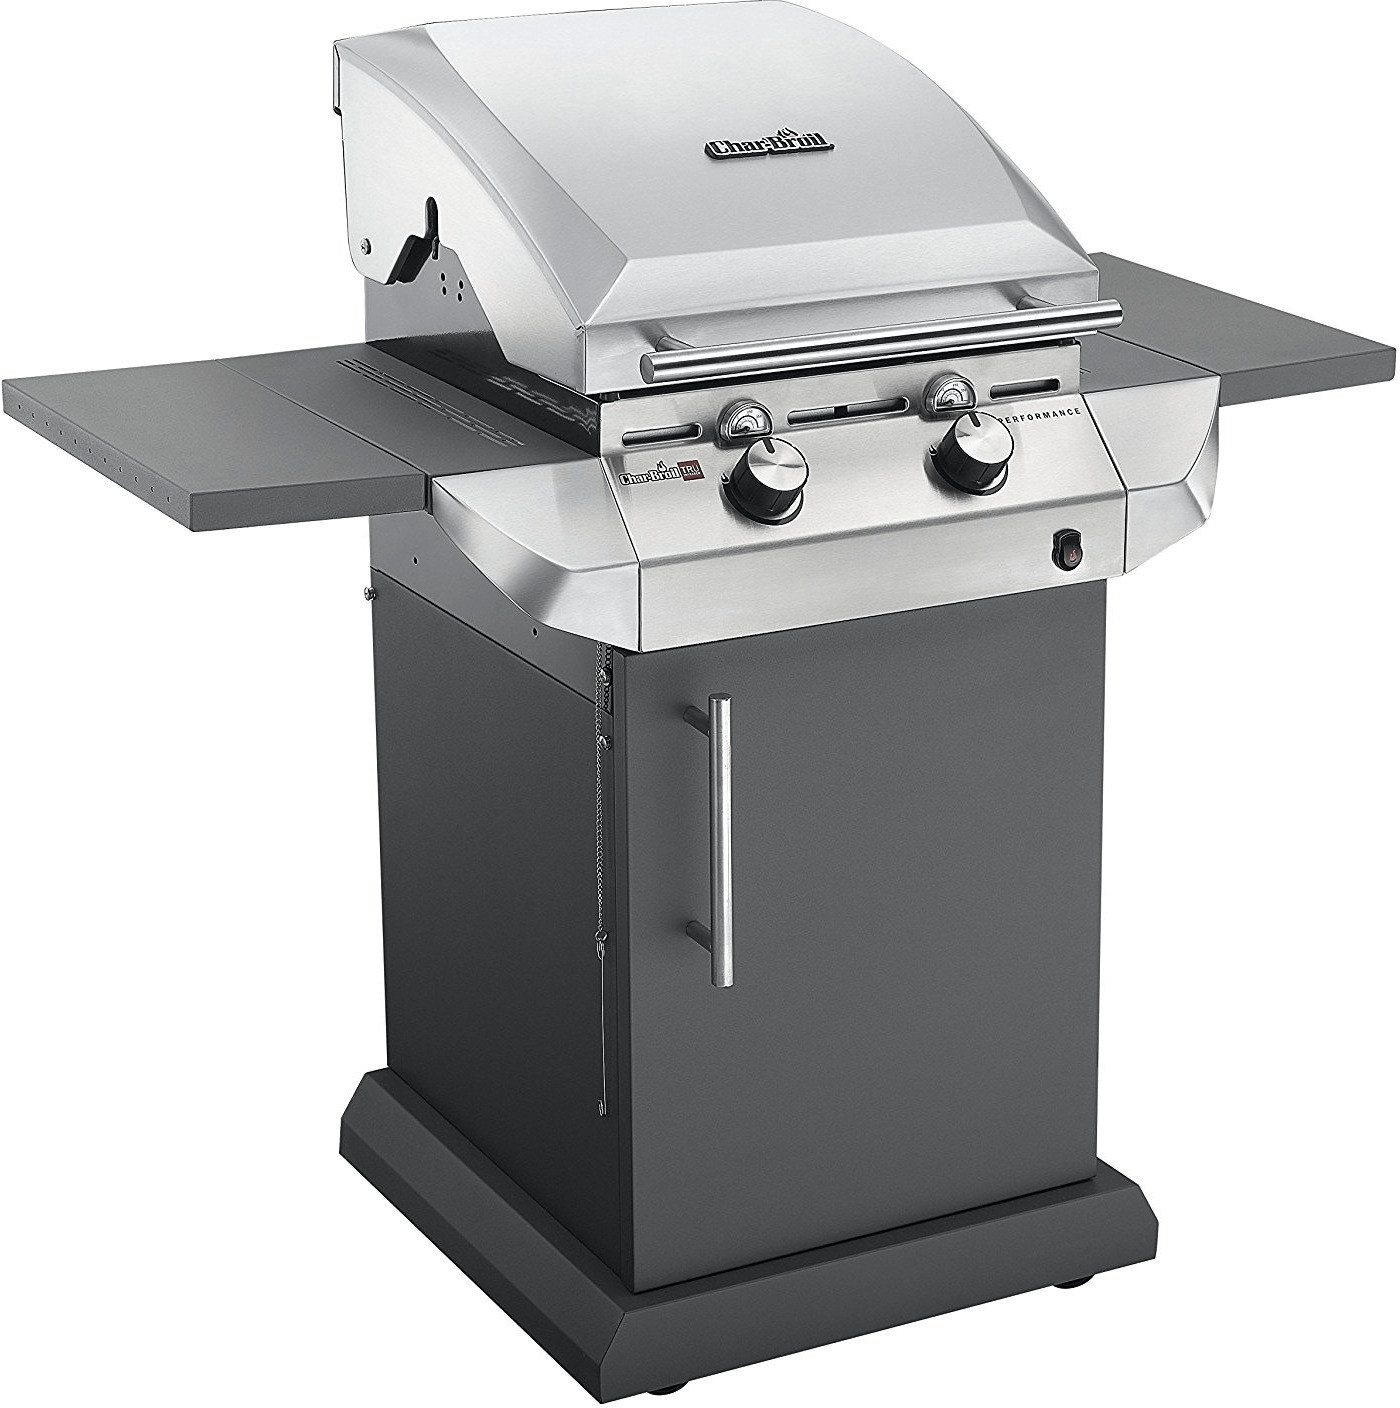 Char-Broil Performance T-22G